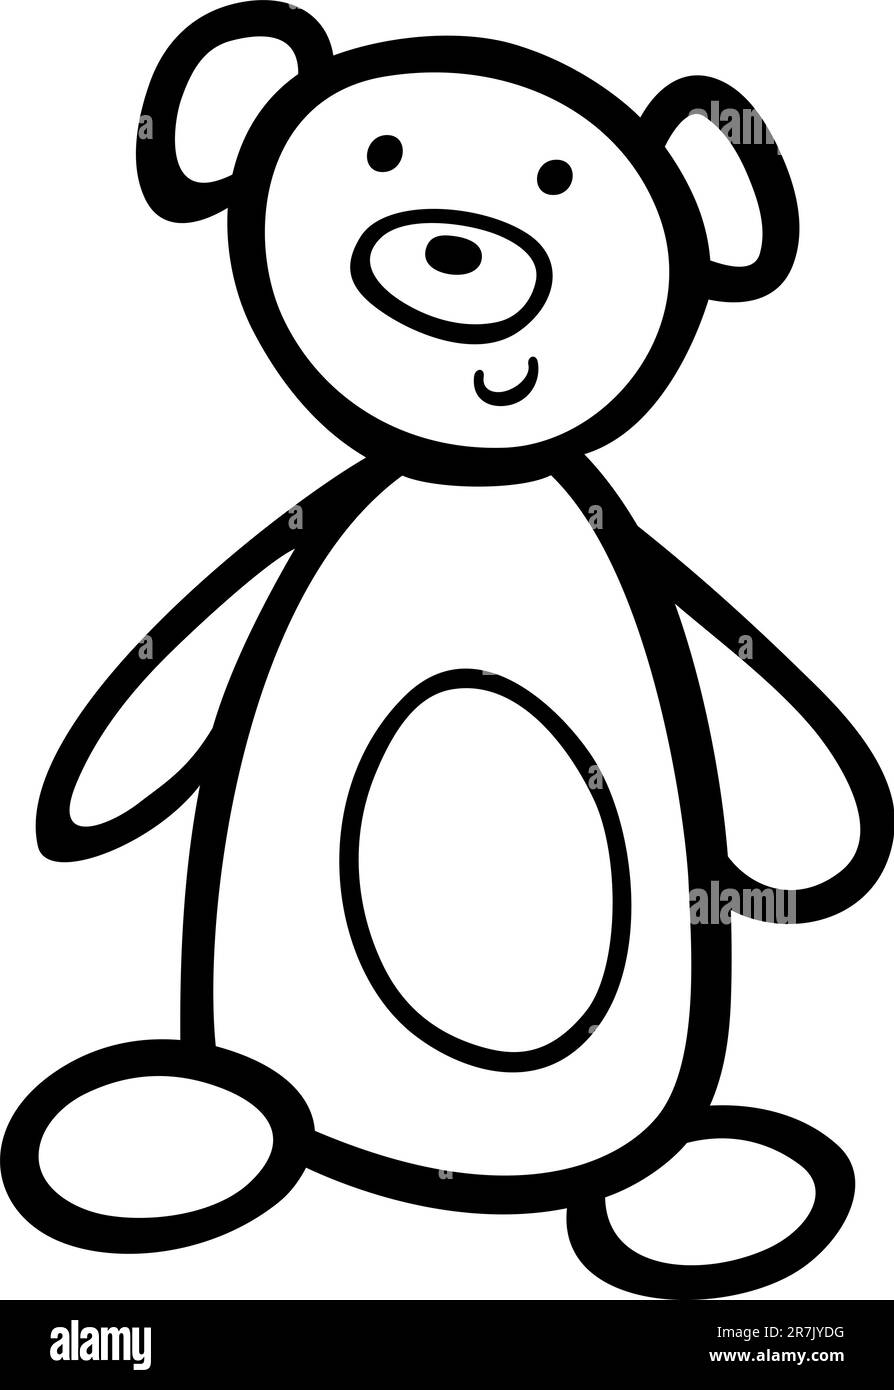 cartoon illustration of cute teddy bear toy for coloring book Stock Vector